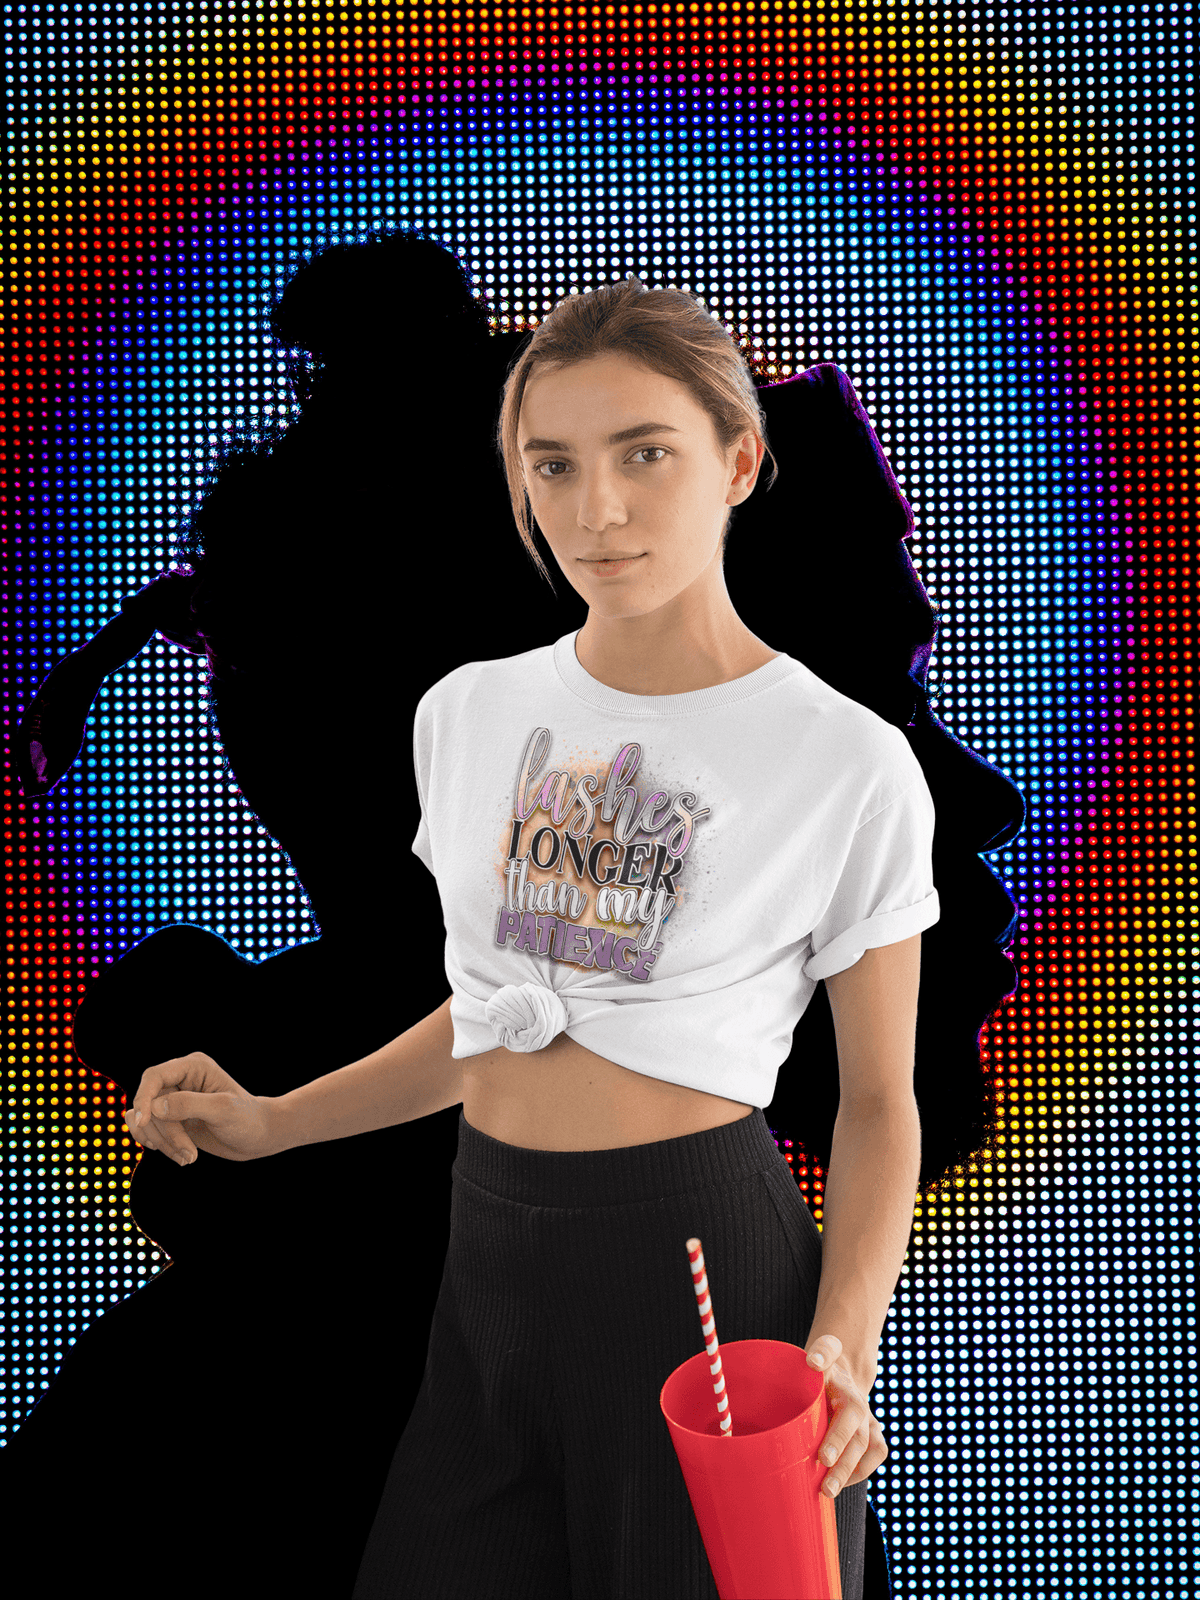 LASHES LONGER than my PATIENCE T-shirt - StylinArt